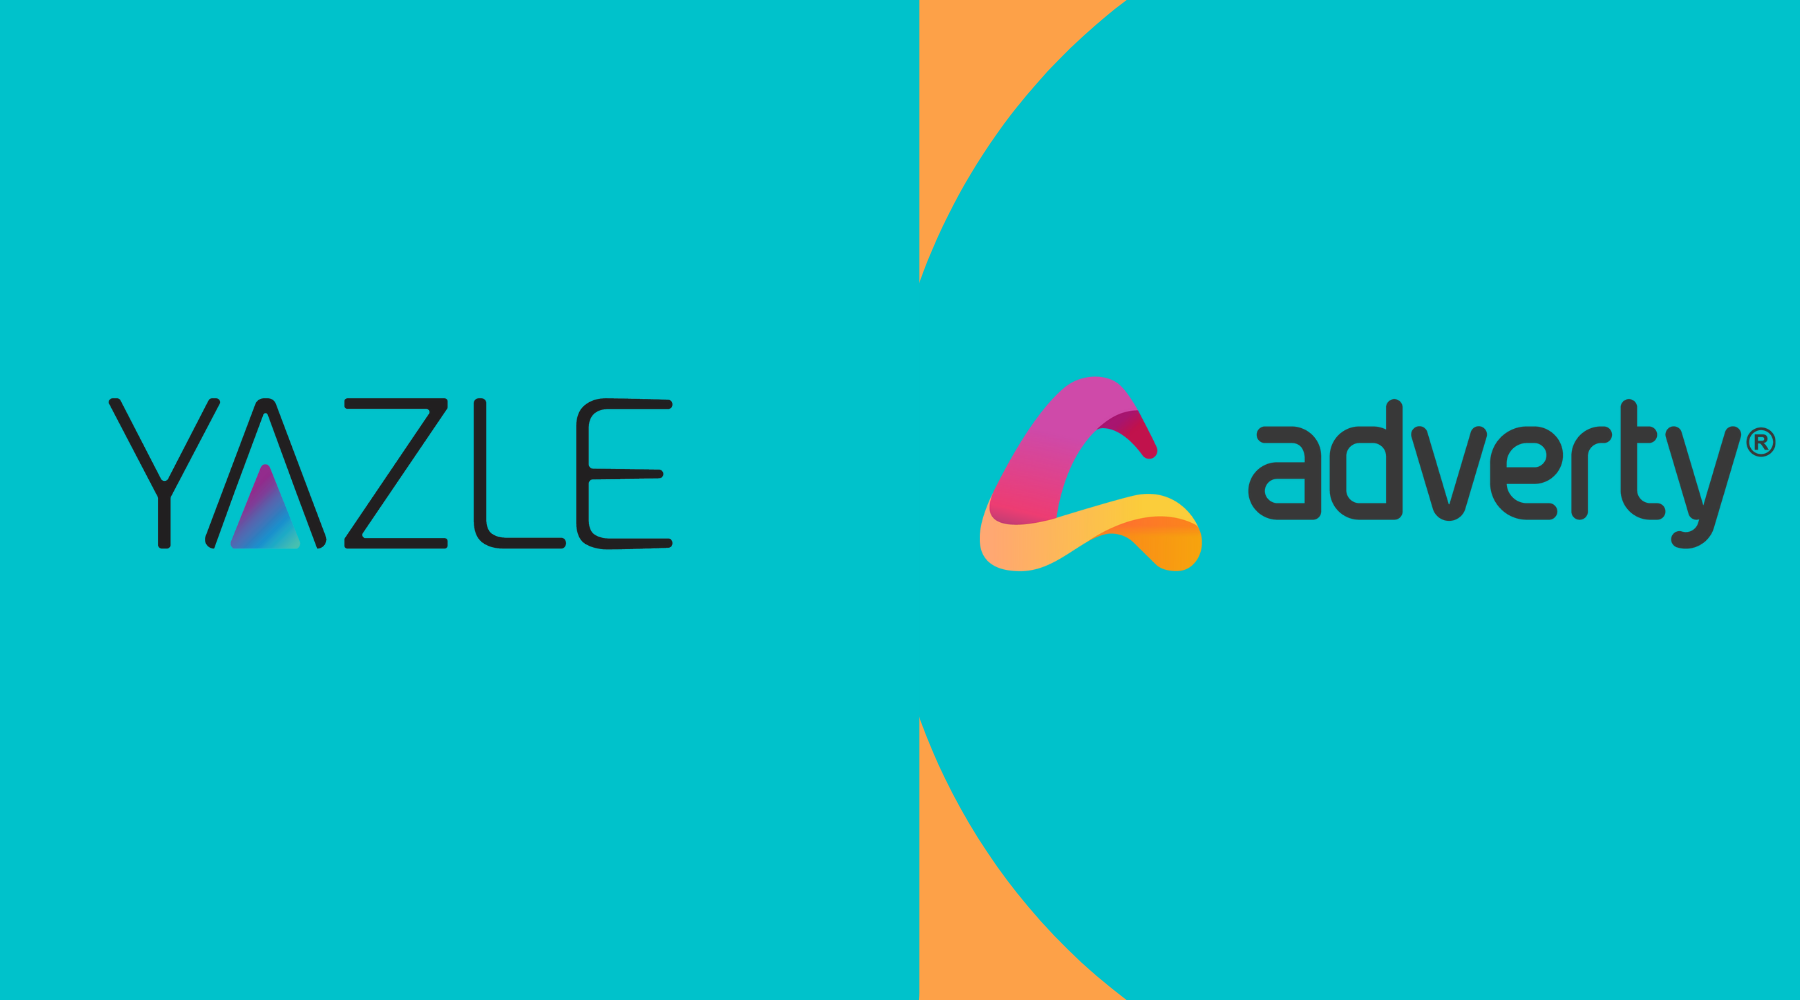 Adverty & Yazle Announce Exclusive In-game Ad Partnership in MENA Region